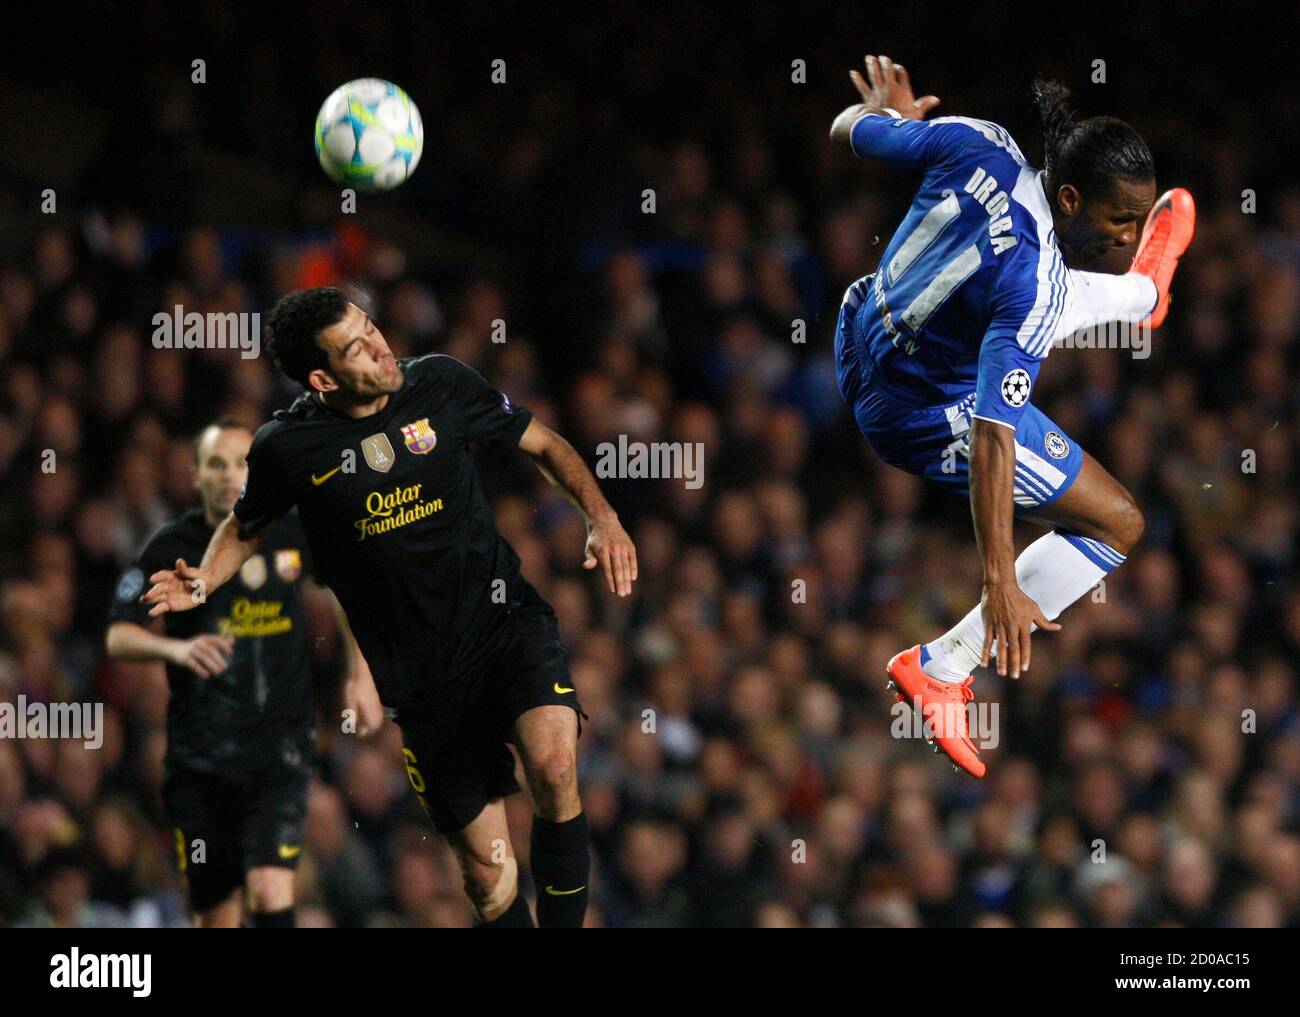 Didier Drogba R Of Chelsea And Sergio Busquets Of Barcelona Jump For A Header During Their Champions League Semi Final First Leg Soccer Match At Stamford Bridge In London April 18 12 Reuters Albert